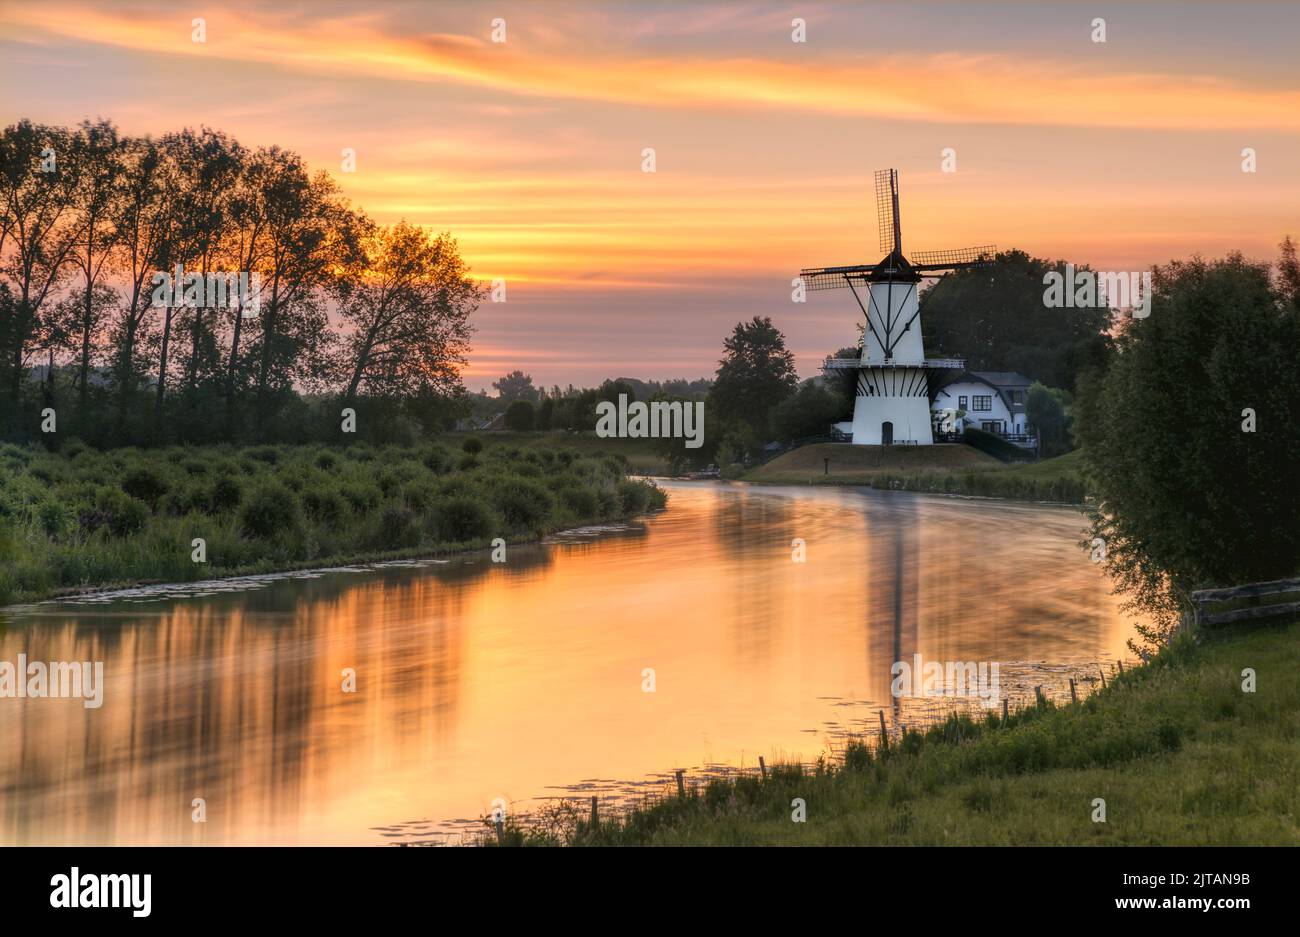 'De Vlinder' is a typical and picturesque Dutch windmill located in the central part of the Netherlands on the shores of the Linge River. Stock Photo